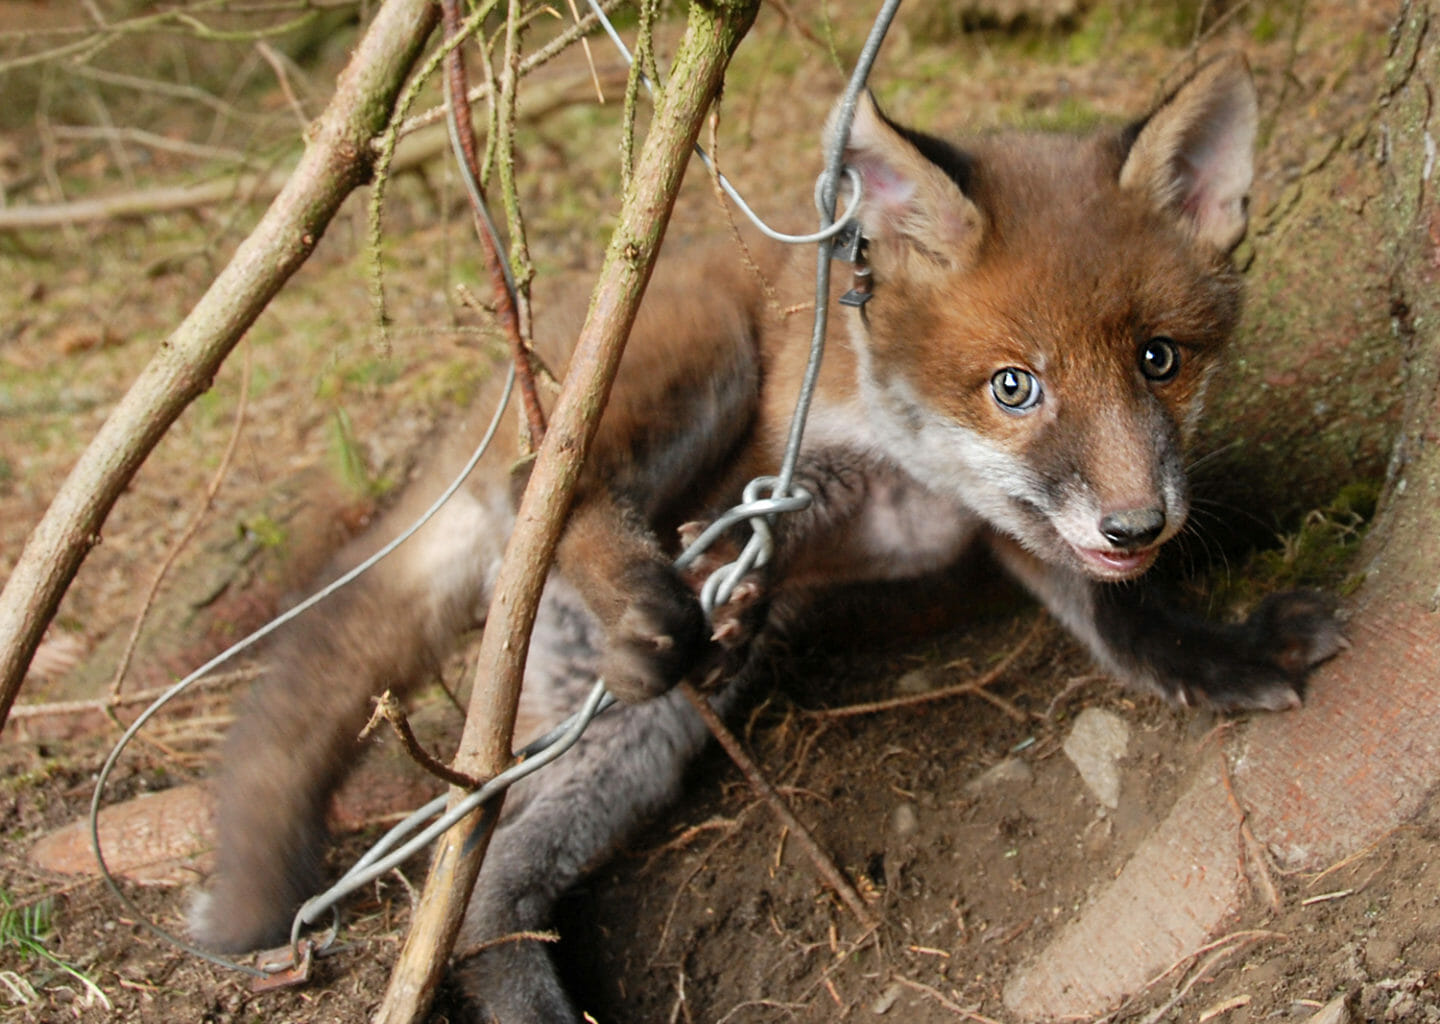 Snare traps killing and injuring pets and protected species